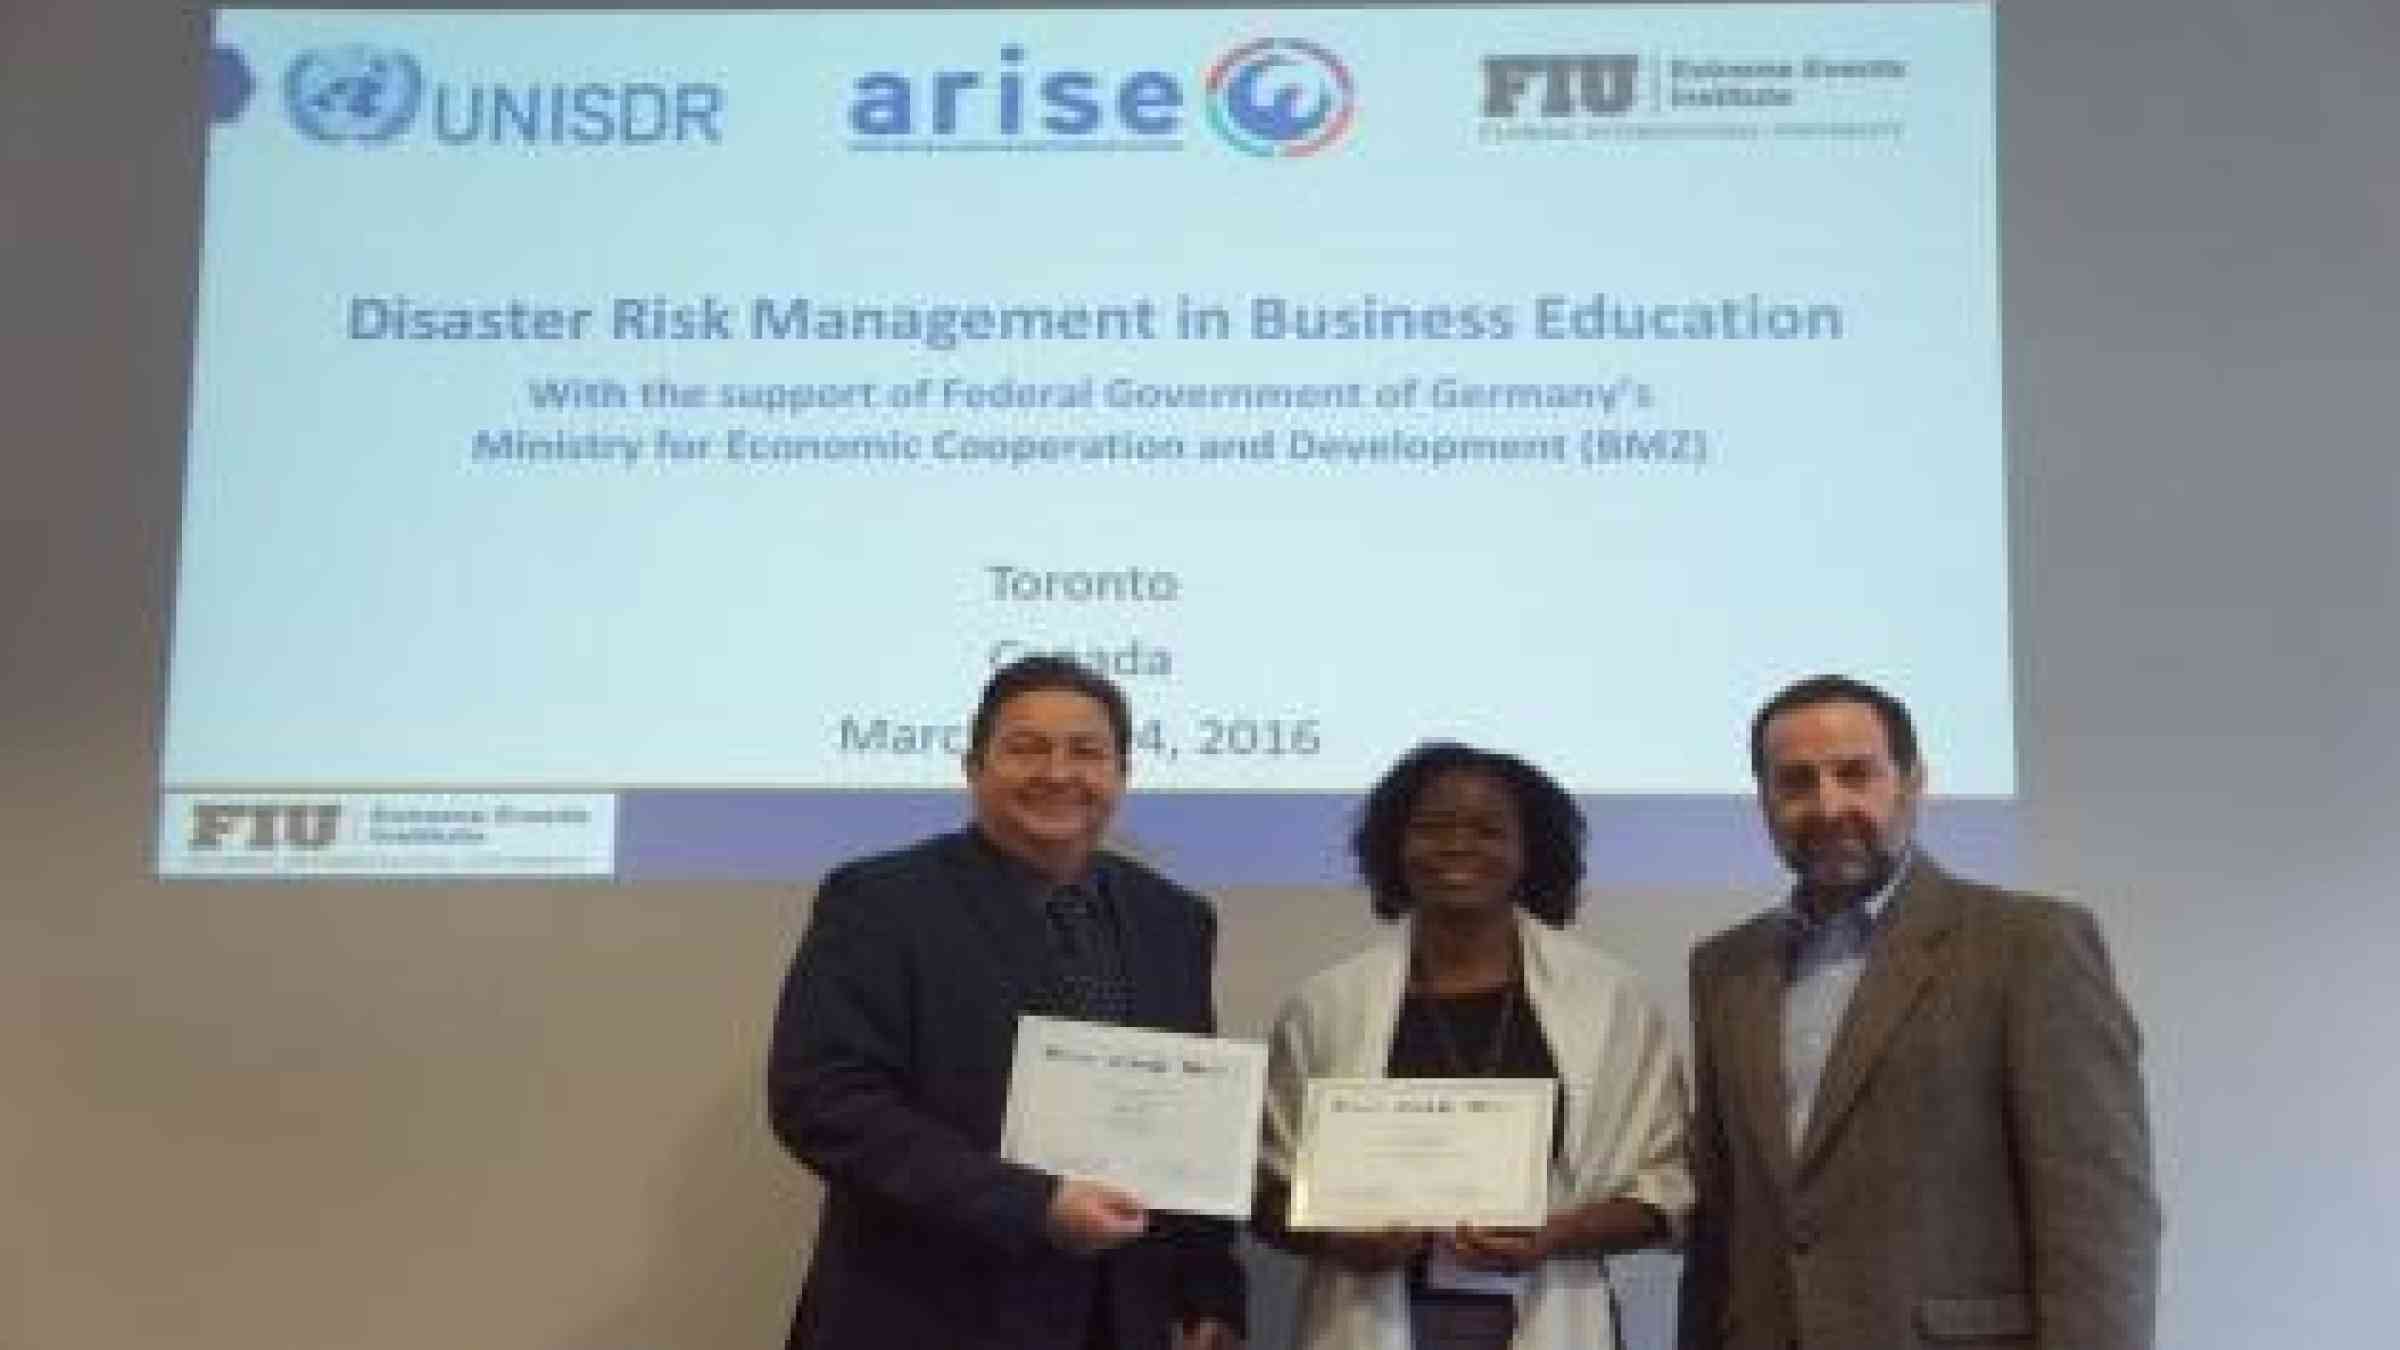 Ms. Indianna D. Minto-Coy (centre) from the Mona School of Business & Management, University of the West Indies, winner of the award for best disaster risk management new academic offering, is congratulated by Professor Juan Pablo Sarmiento of Florida International University (right) and Mr. Neil McFarlane of UNISDR (left) (Photo: UNISDR)